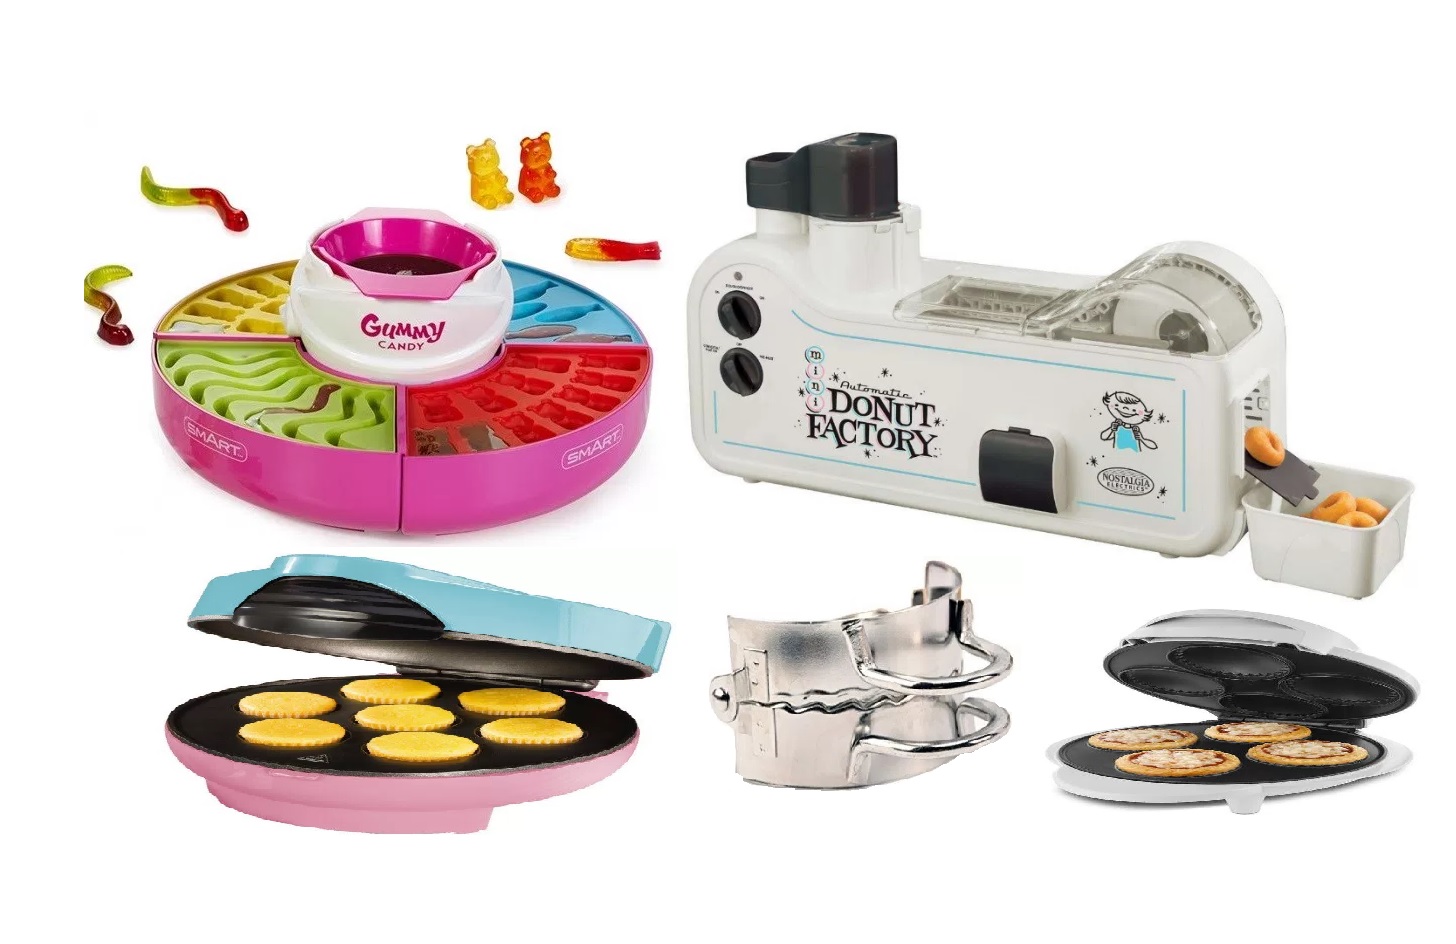 Top 10 Mini-Maker Kitchen Gadgets You Didn't Know Existed